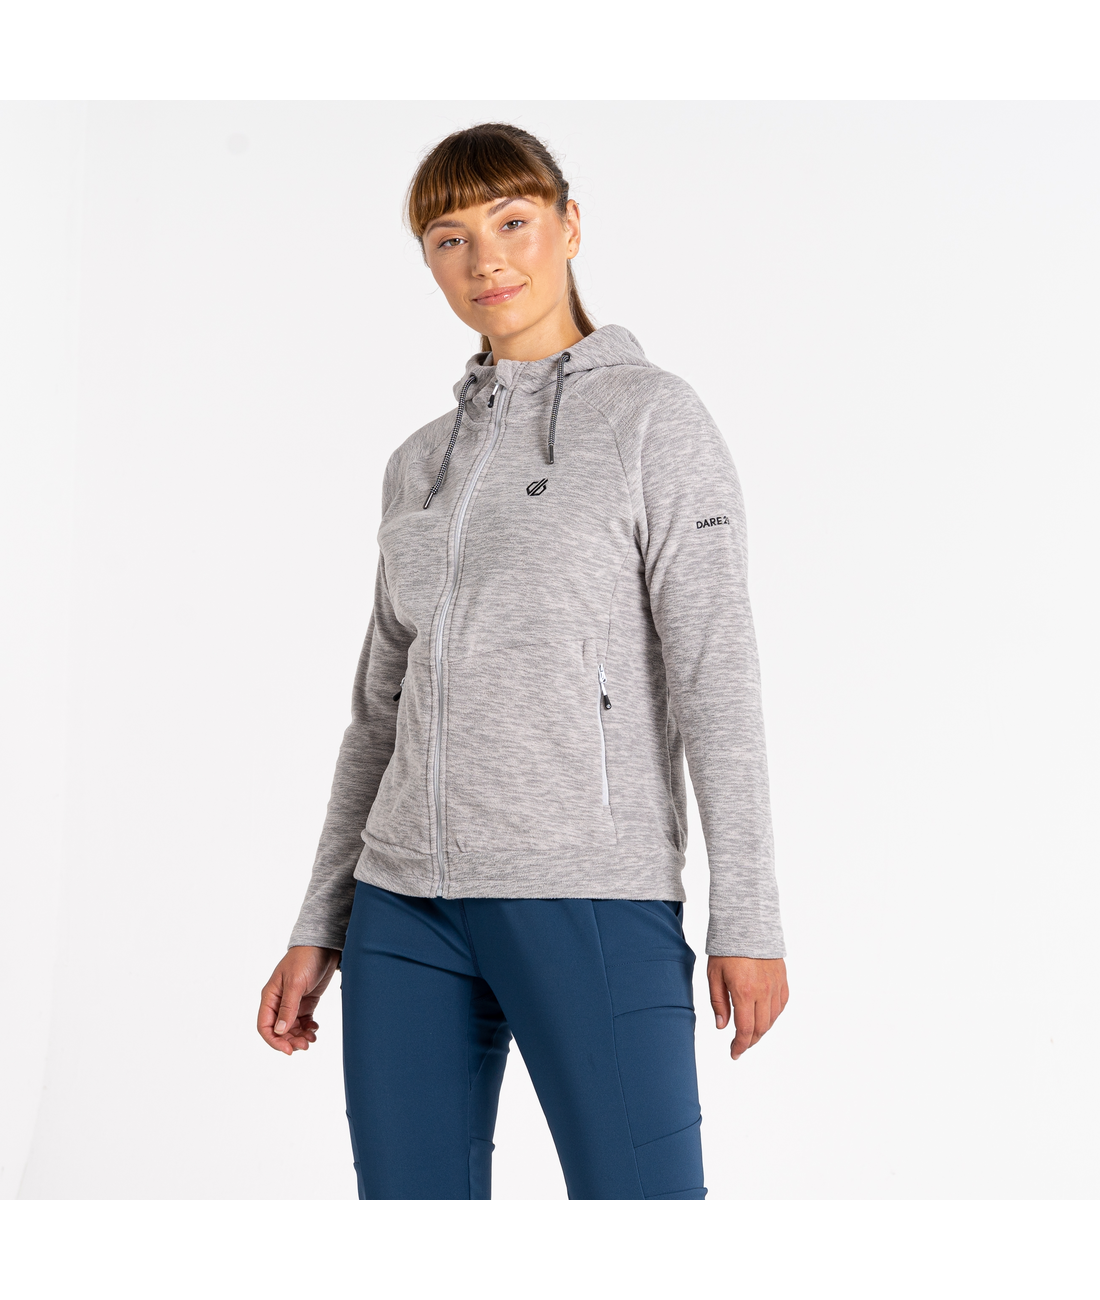 Out & Out Full Zip Fleece